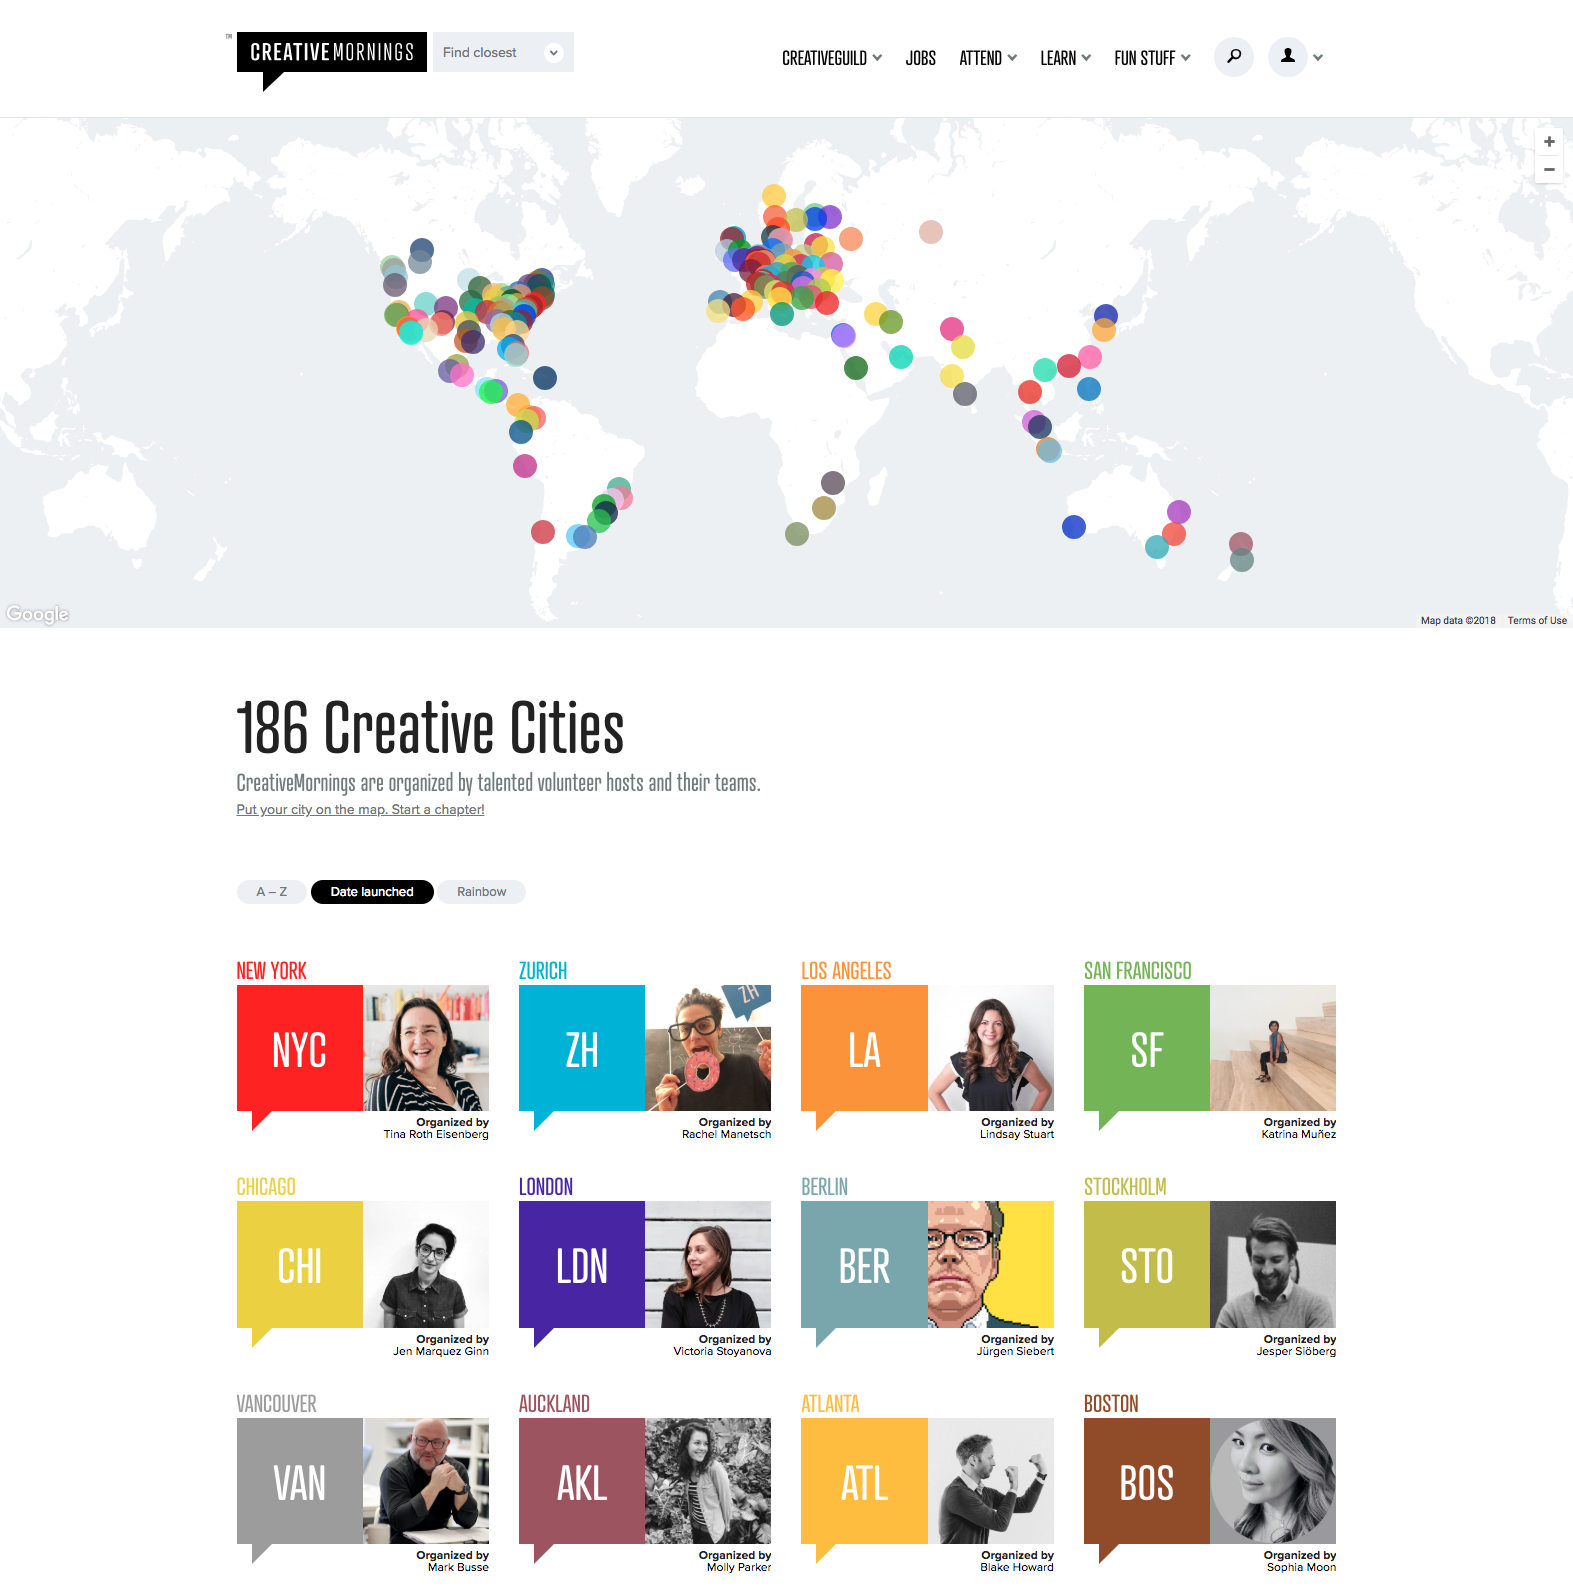 CreativeCities.png